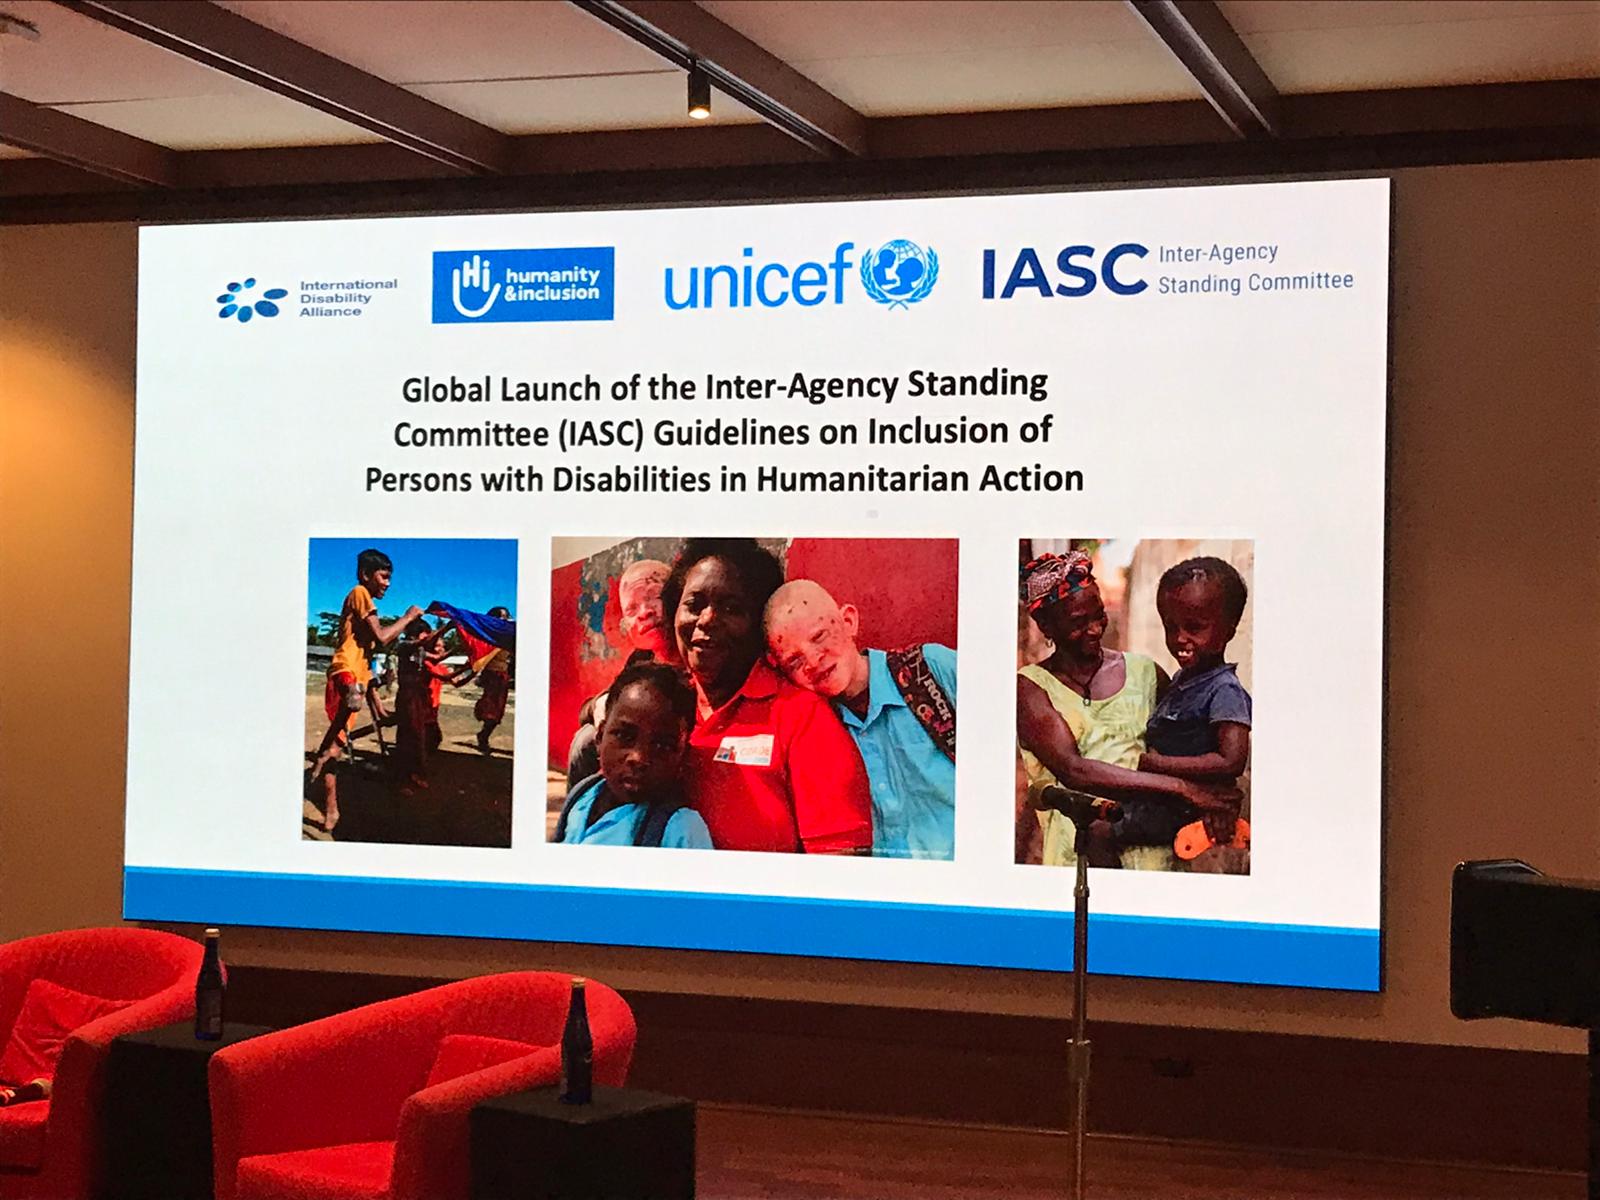 The photo shows the podium at the launch of the IASC Guidelines 2019.